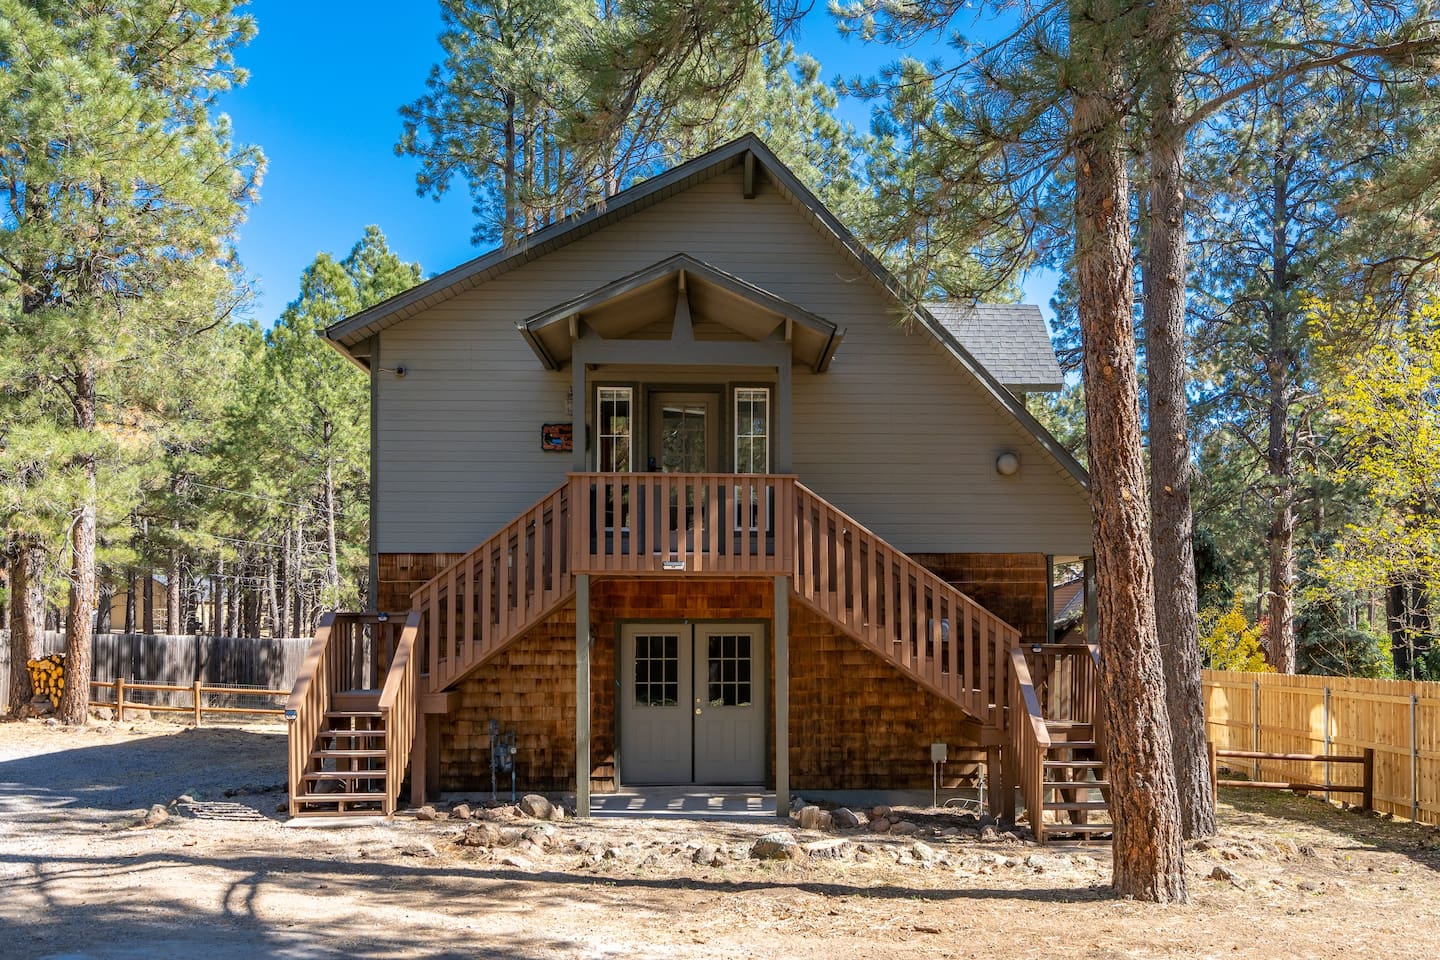 The Magdalena Cottage is one of the 15 best Airbnbs in Flagstaff